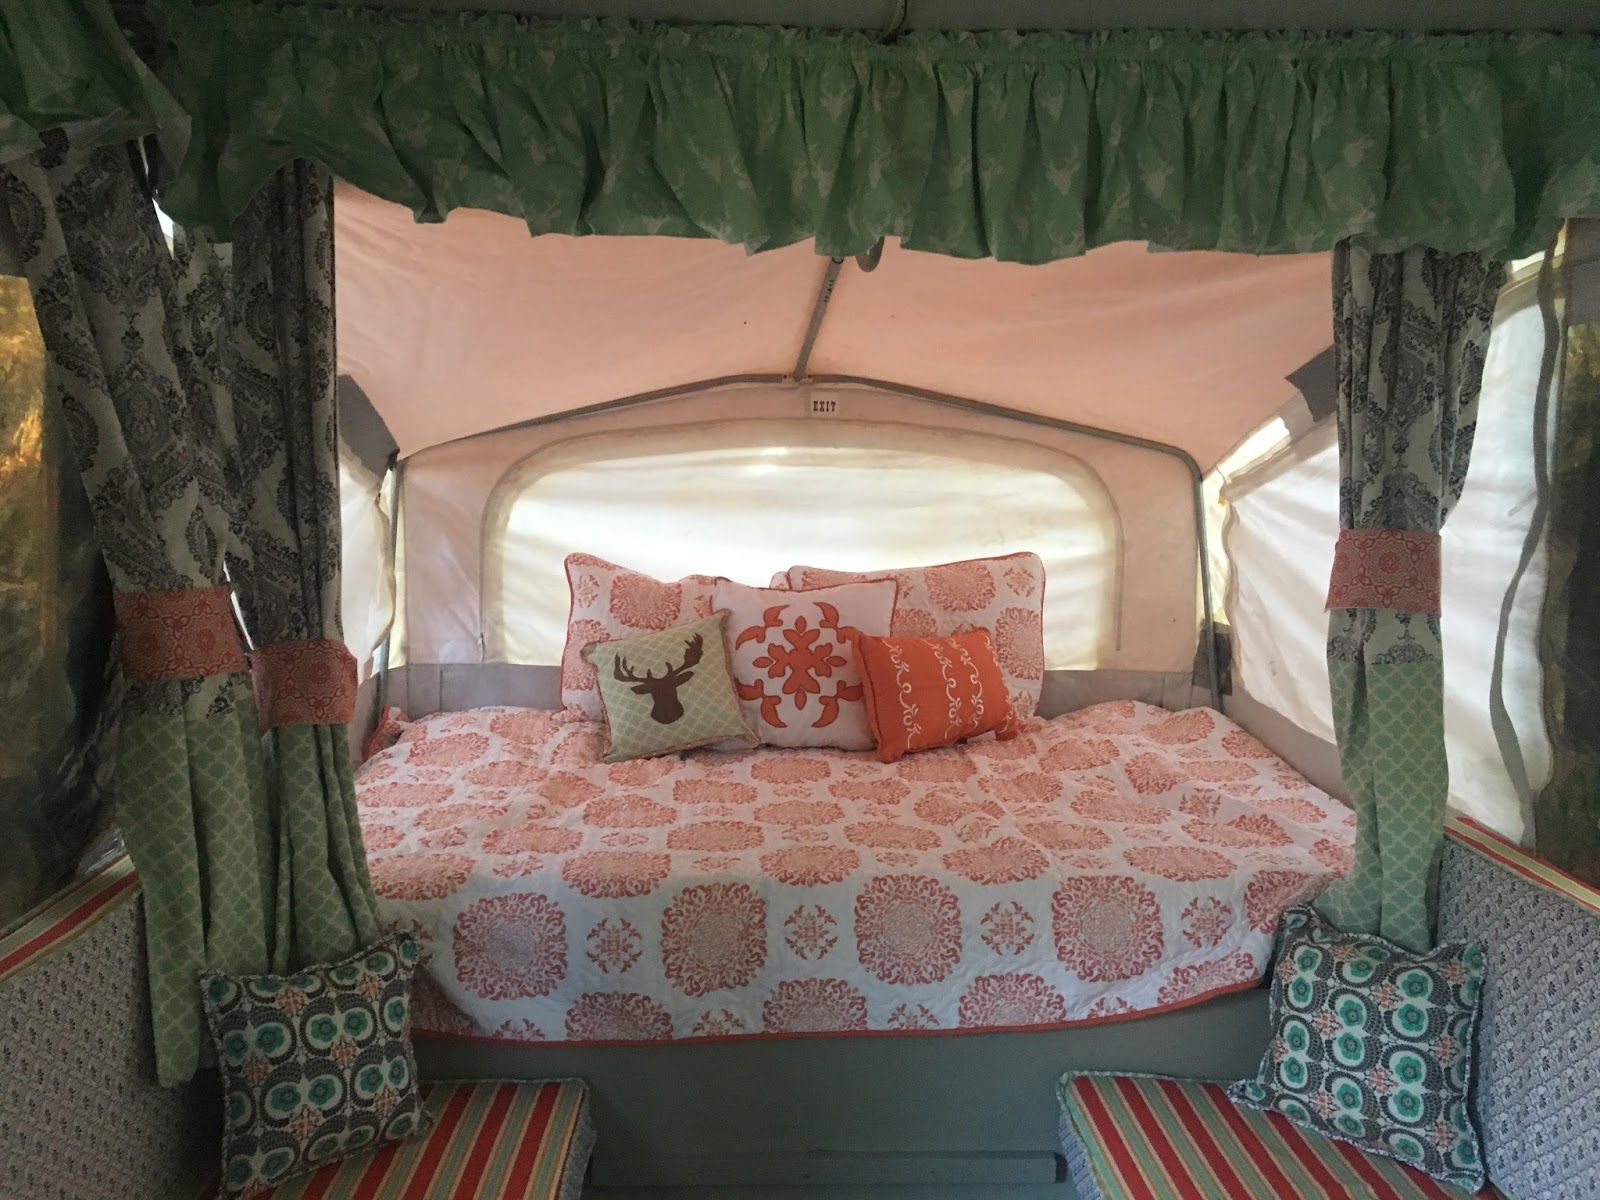 Replacing pop up camper bedding and mattresses on a budget ...